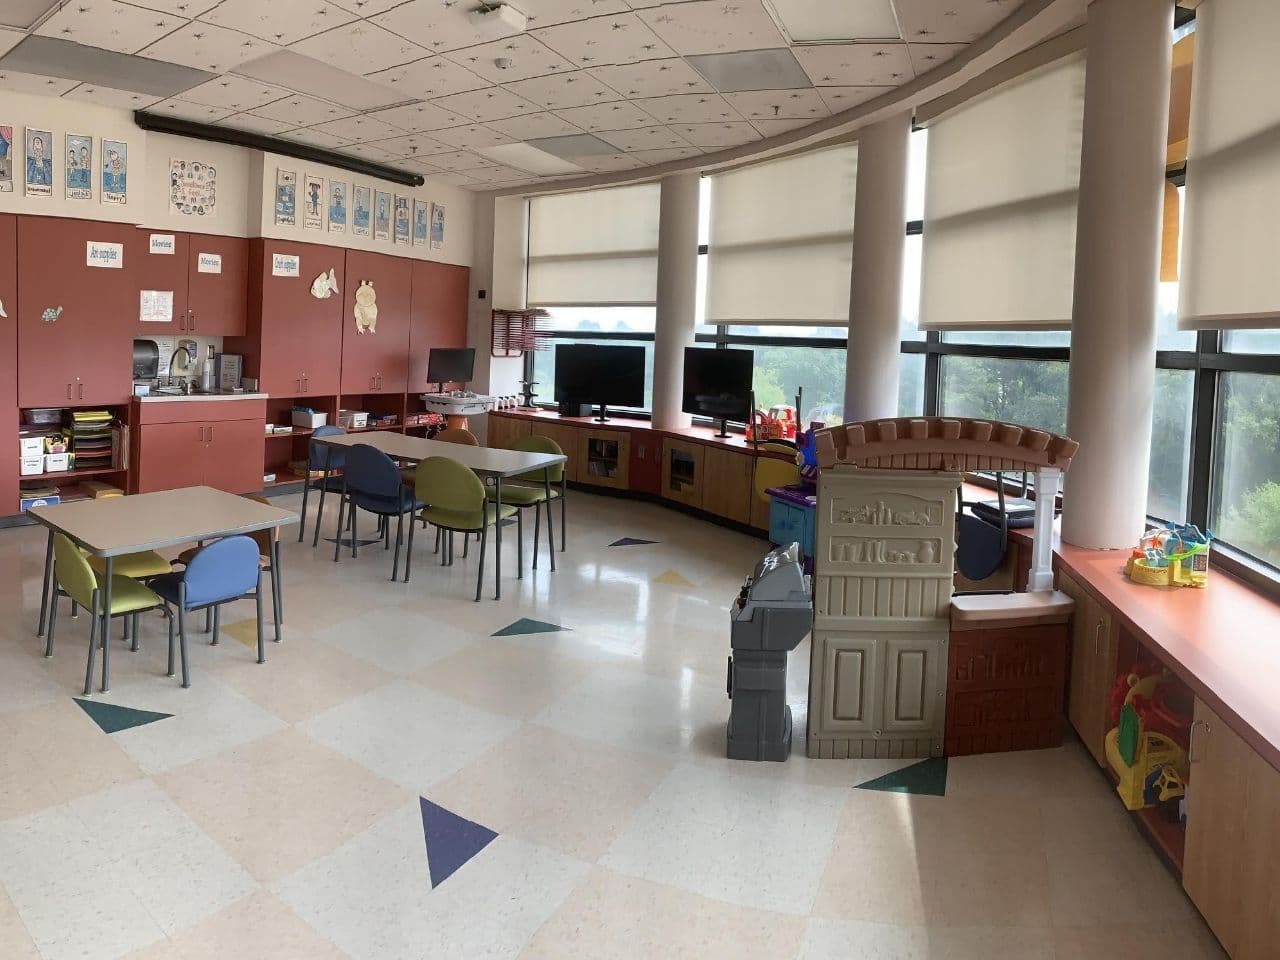 The inpatient playroom has a number of kid-sized tables and chairs with lots of floor space.